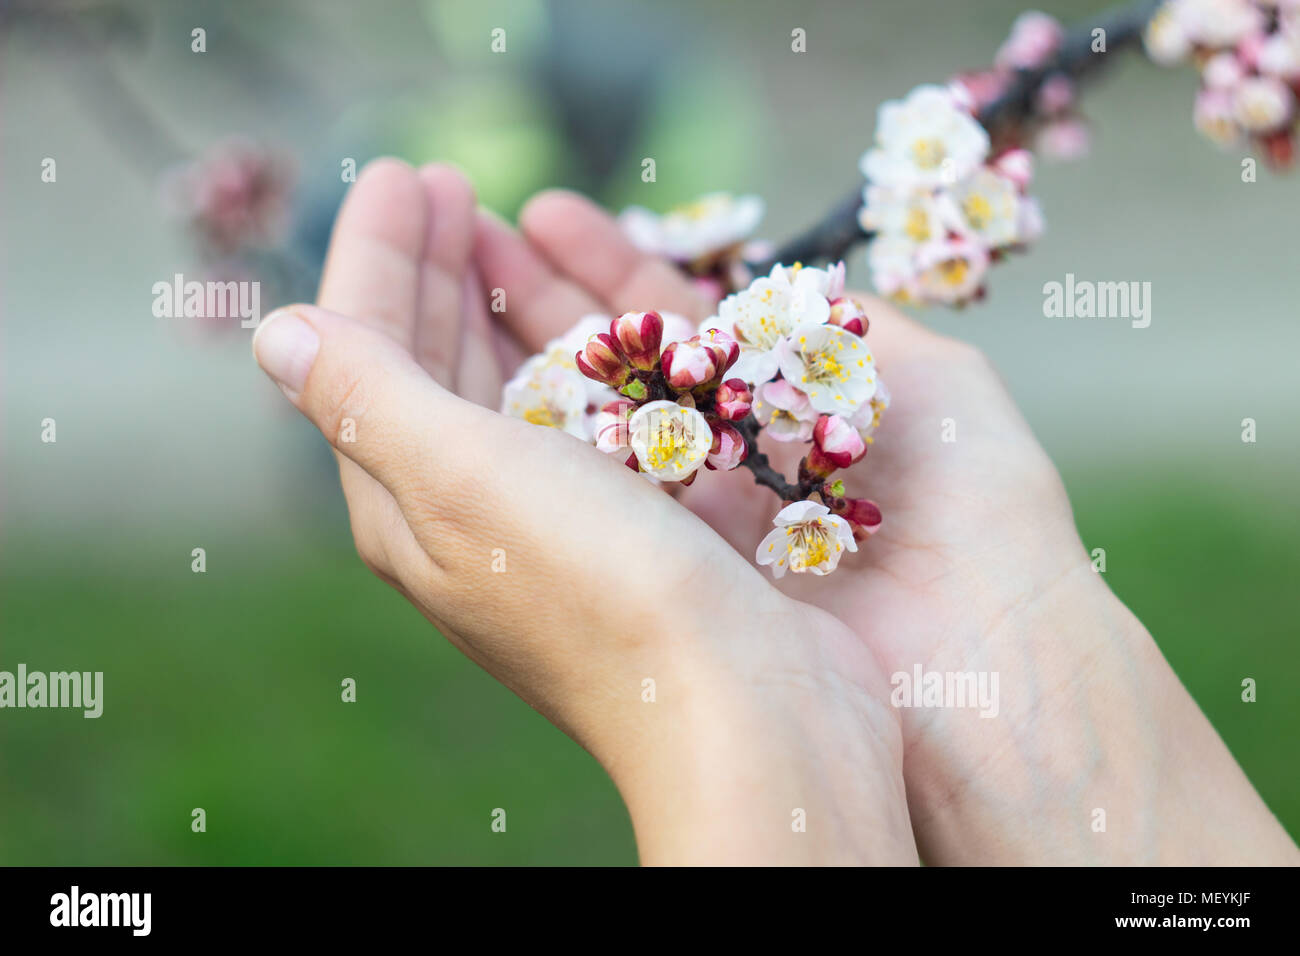 The girl is holding a branch of a blossoming apple tree in her hands Stock Photo